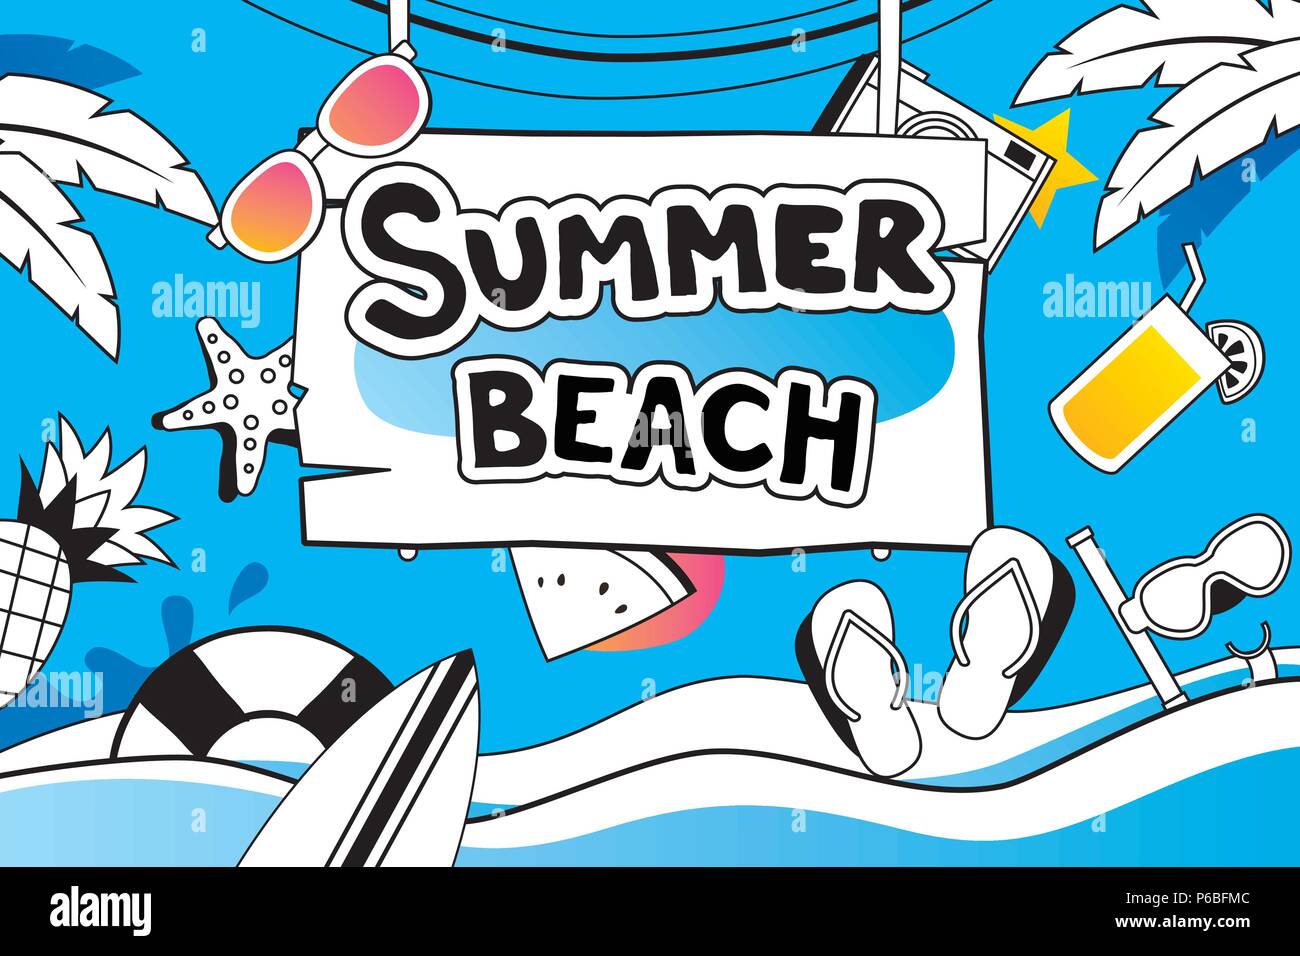 Summer doodle symbol and objects icon design for beach party background. Invitation hand drawn style. Use for labels, stickers, badges, poster, flyer, Stock Vector